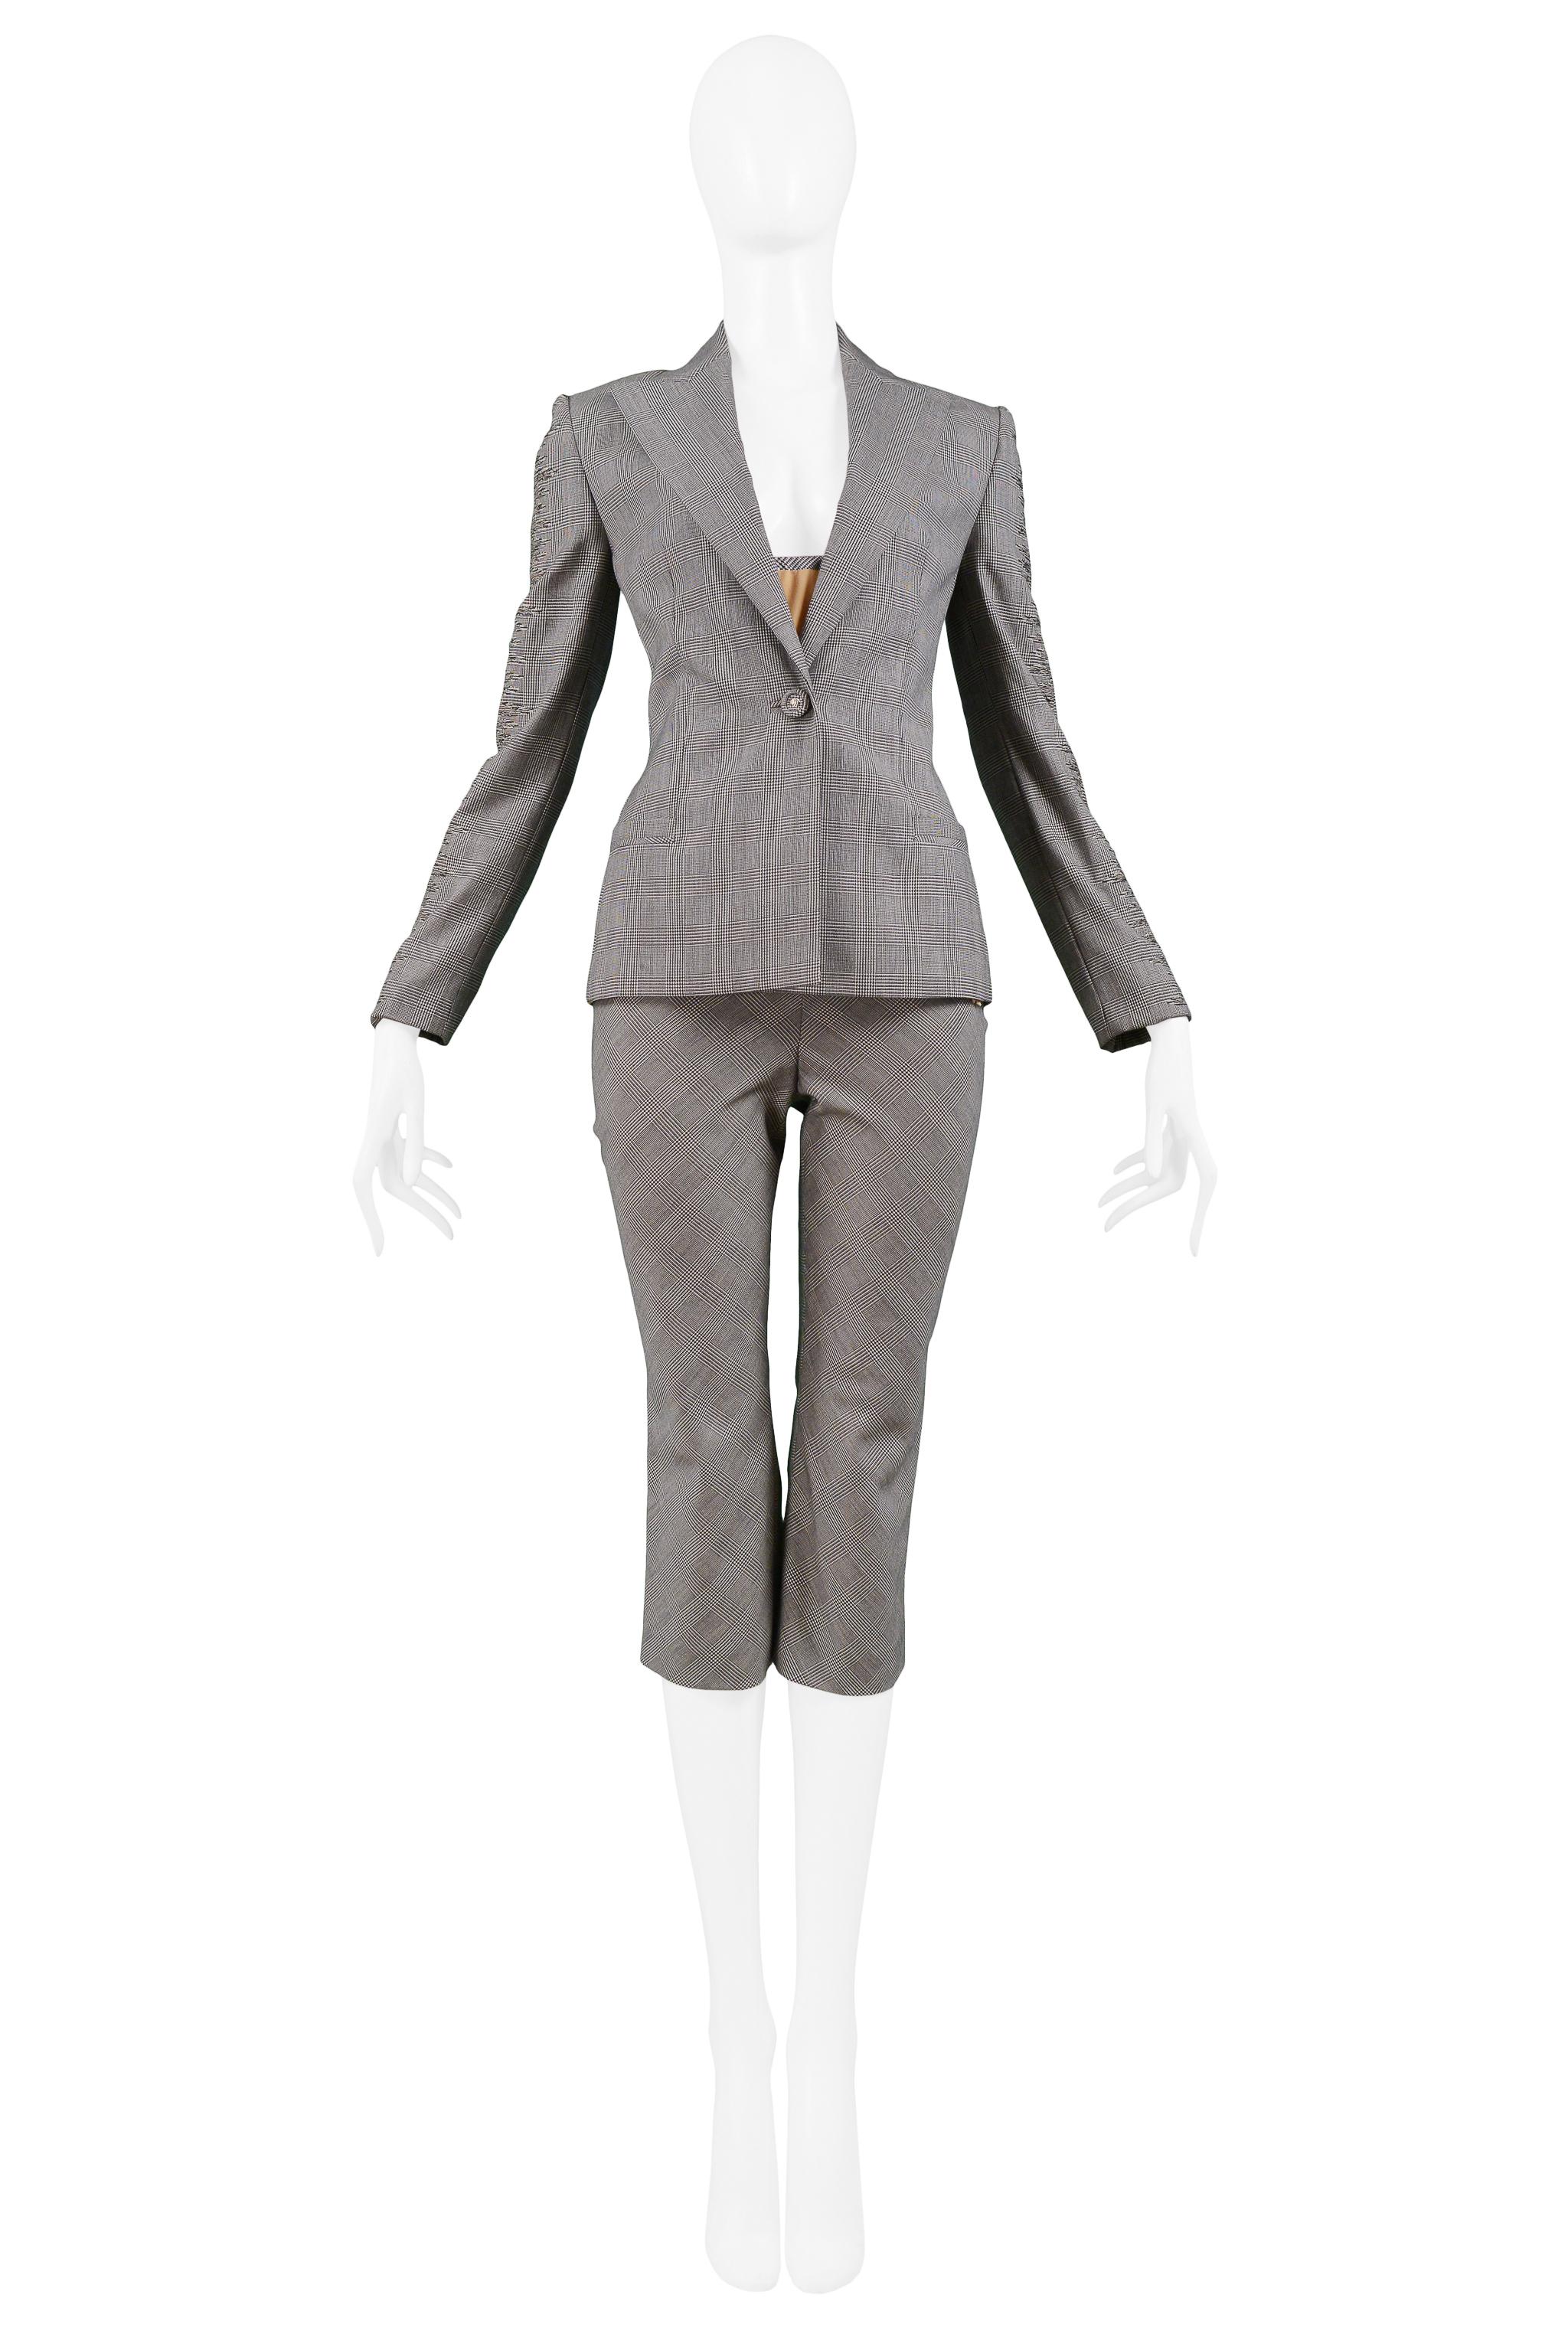 Vintage Versace couture grey wool windowpane check pantsuit. The jacket features embroidered details on sleeves and single button closure with self-faced button. The pants feature a cropped length and side closure. The suit also features two tops, a